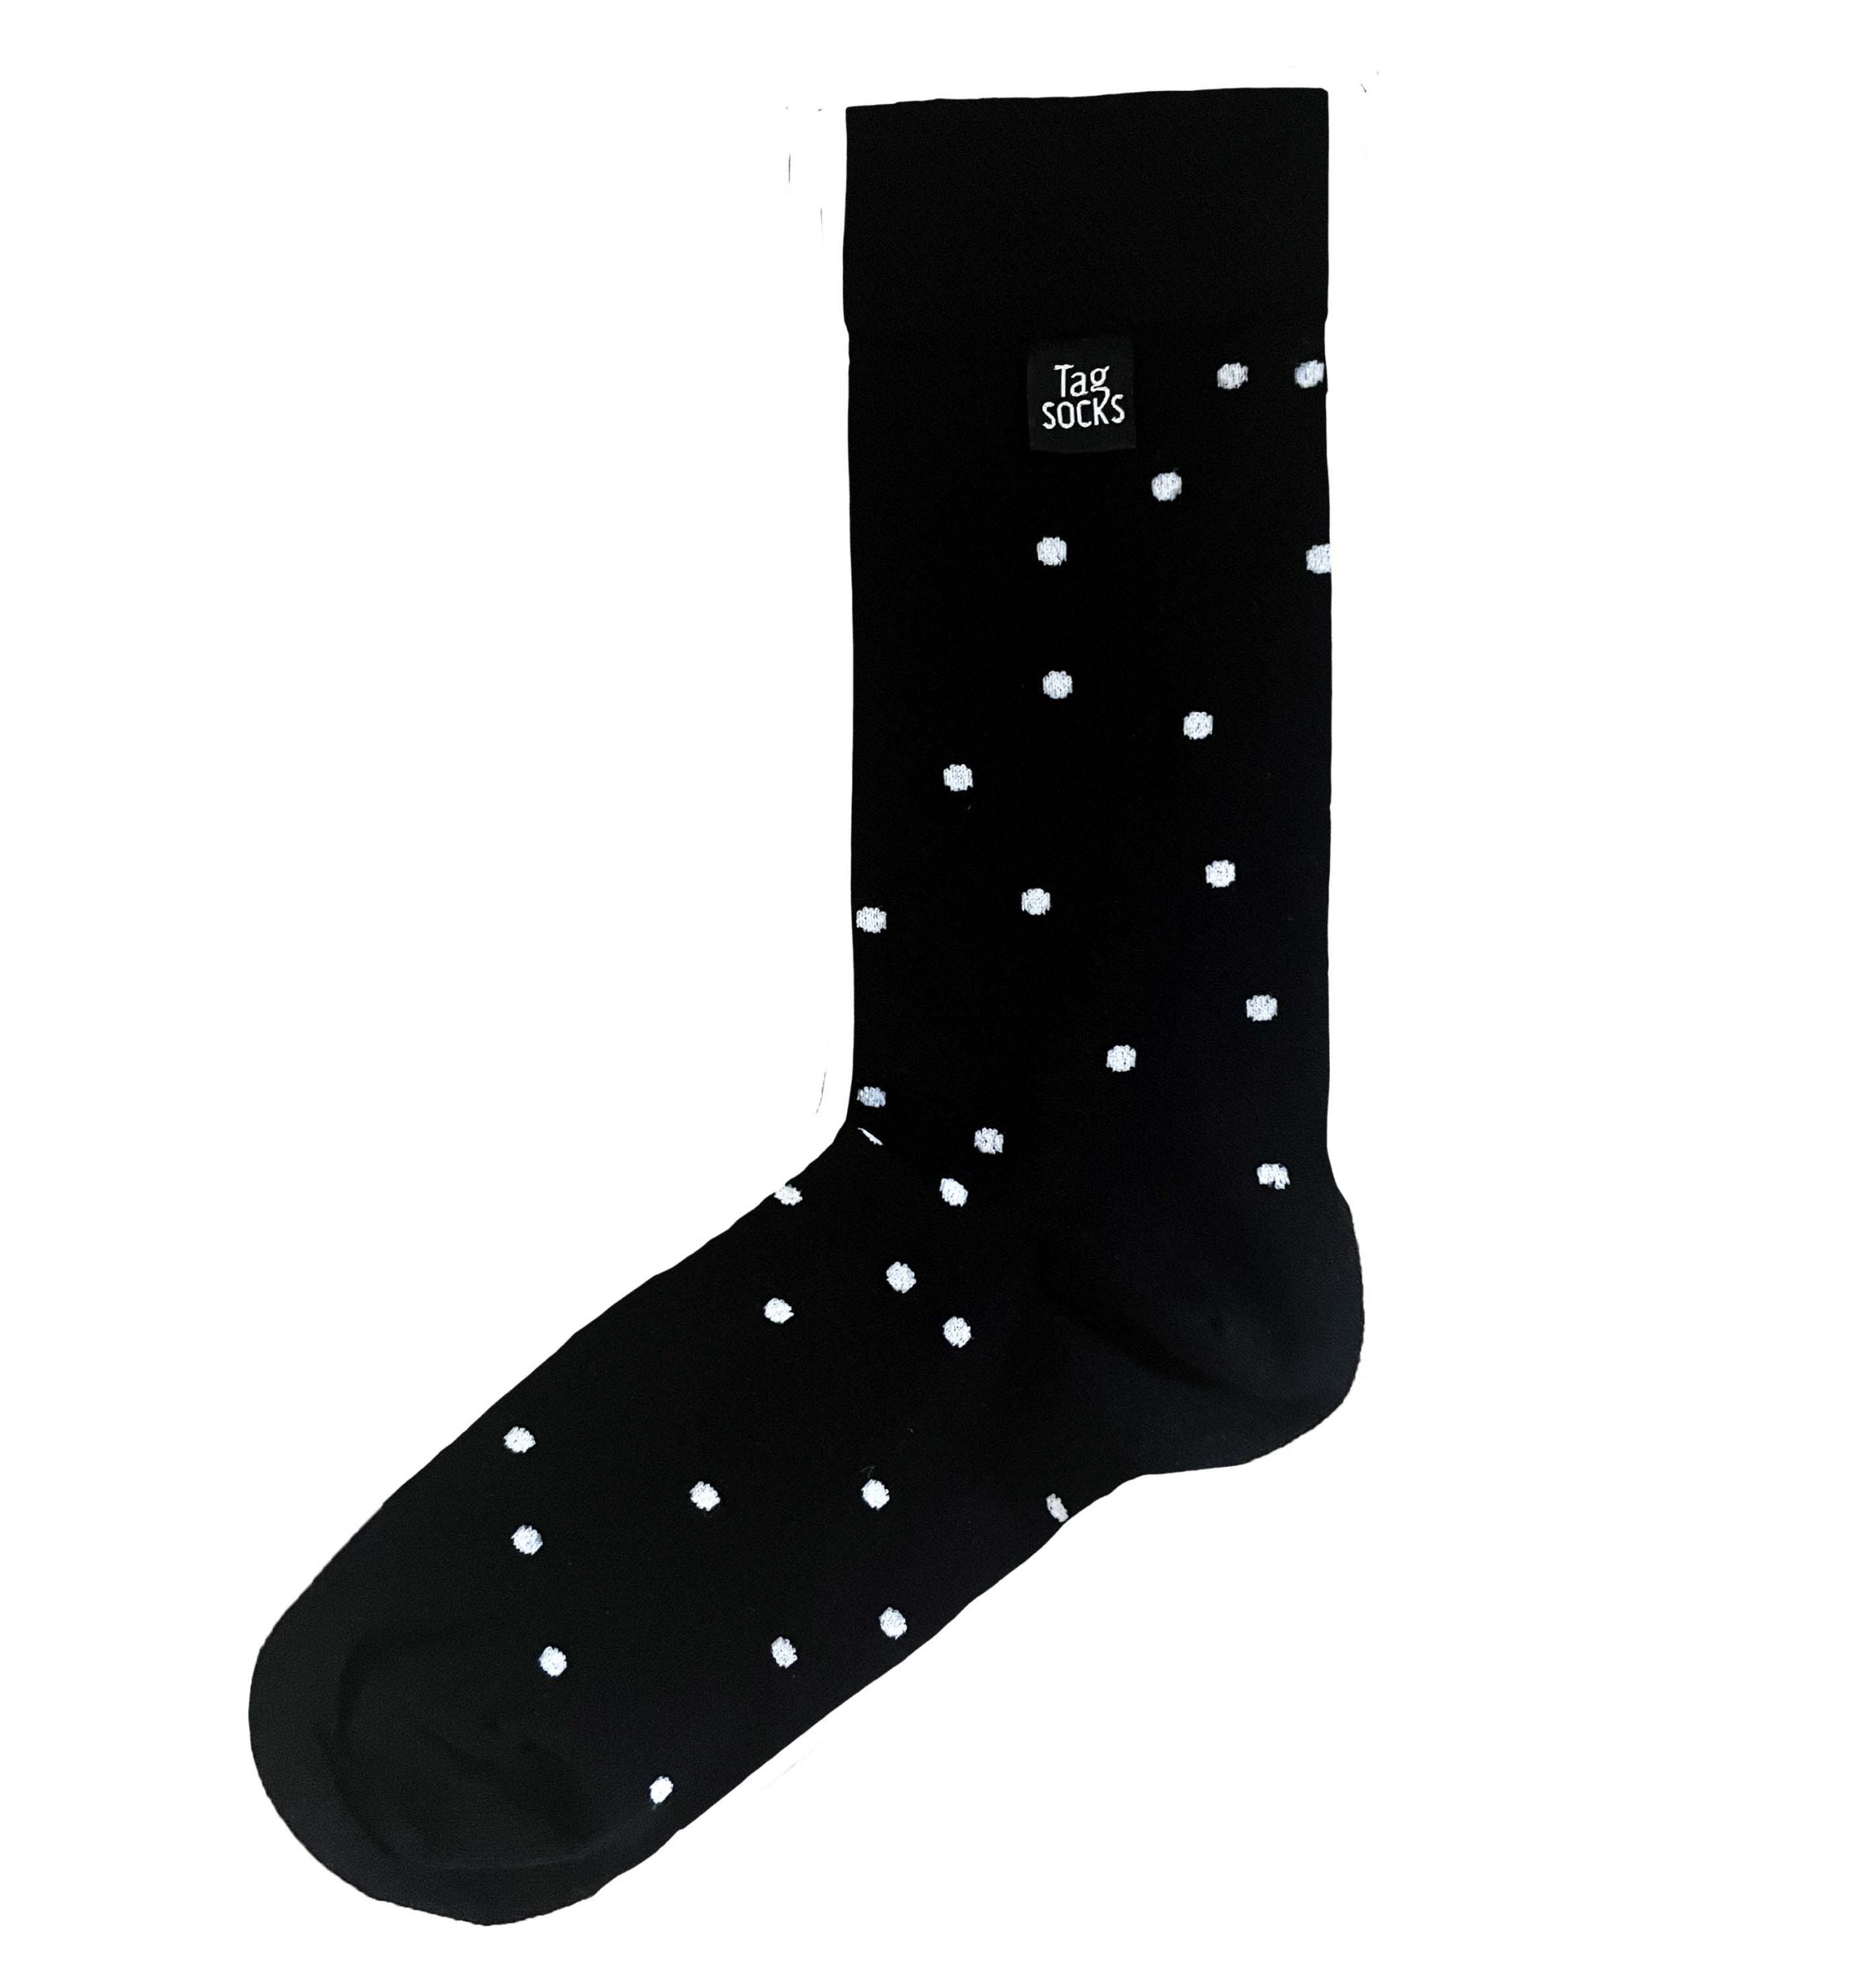 Black sock with white dots from Tag Socks